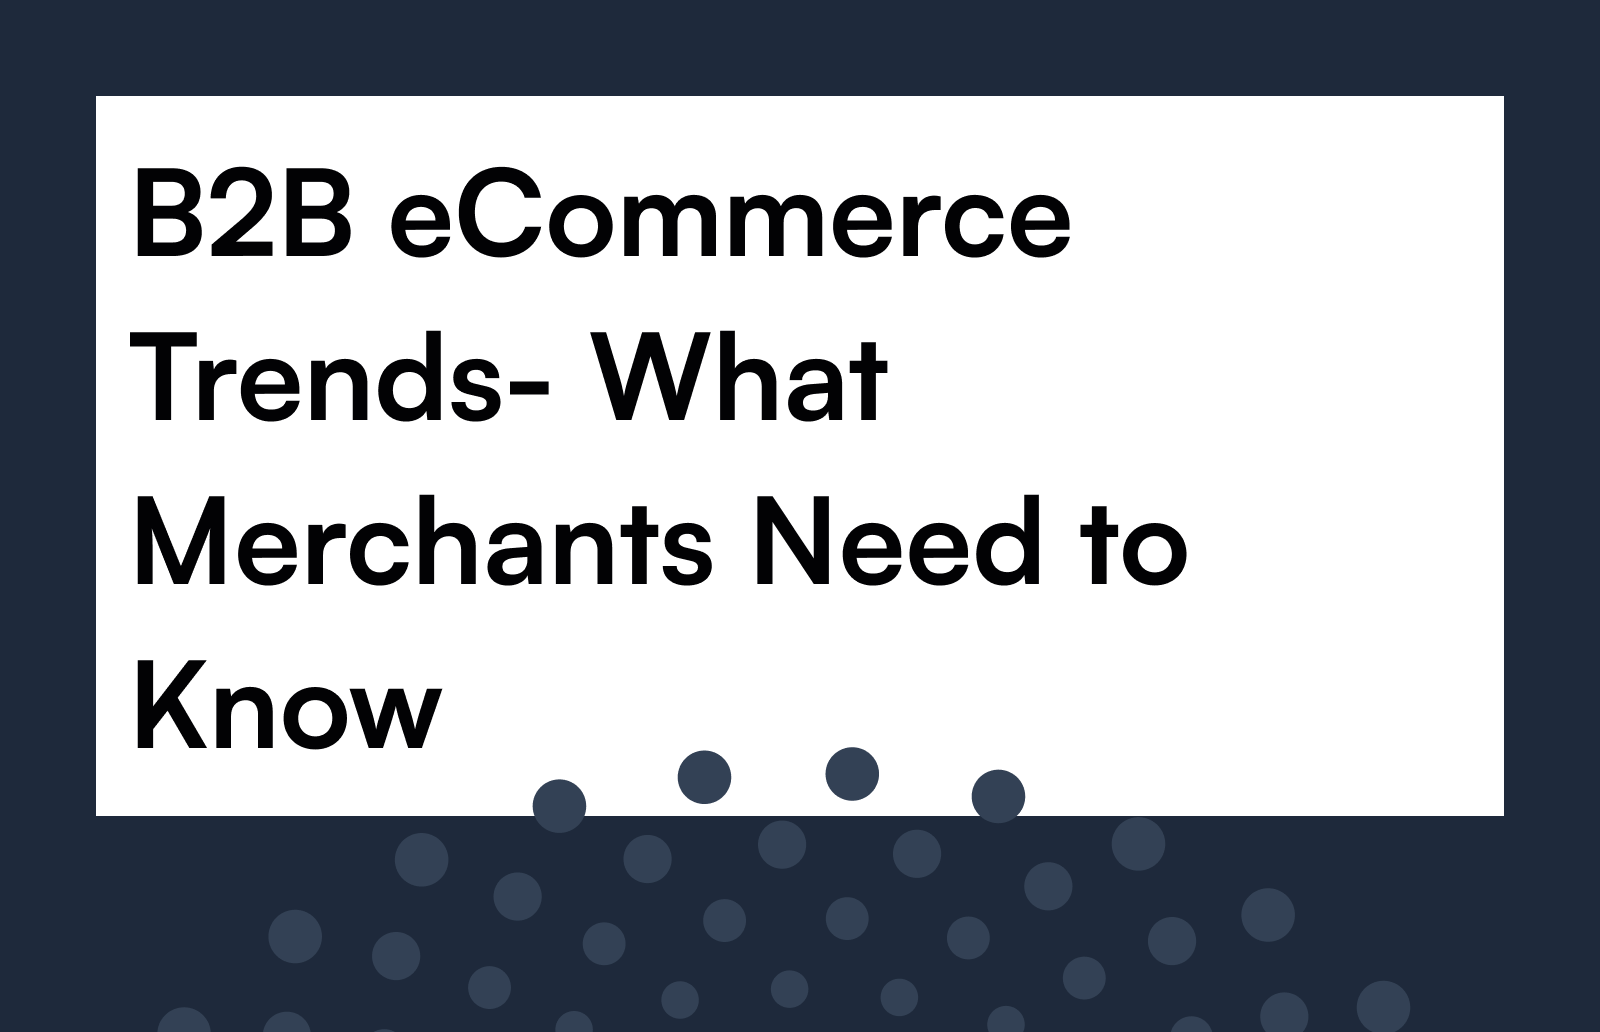 B2B ecommerce Trends- What Merchants Need to Know